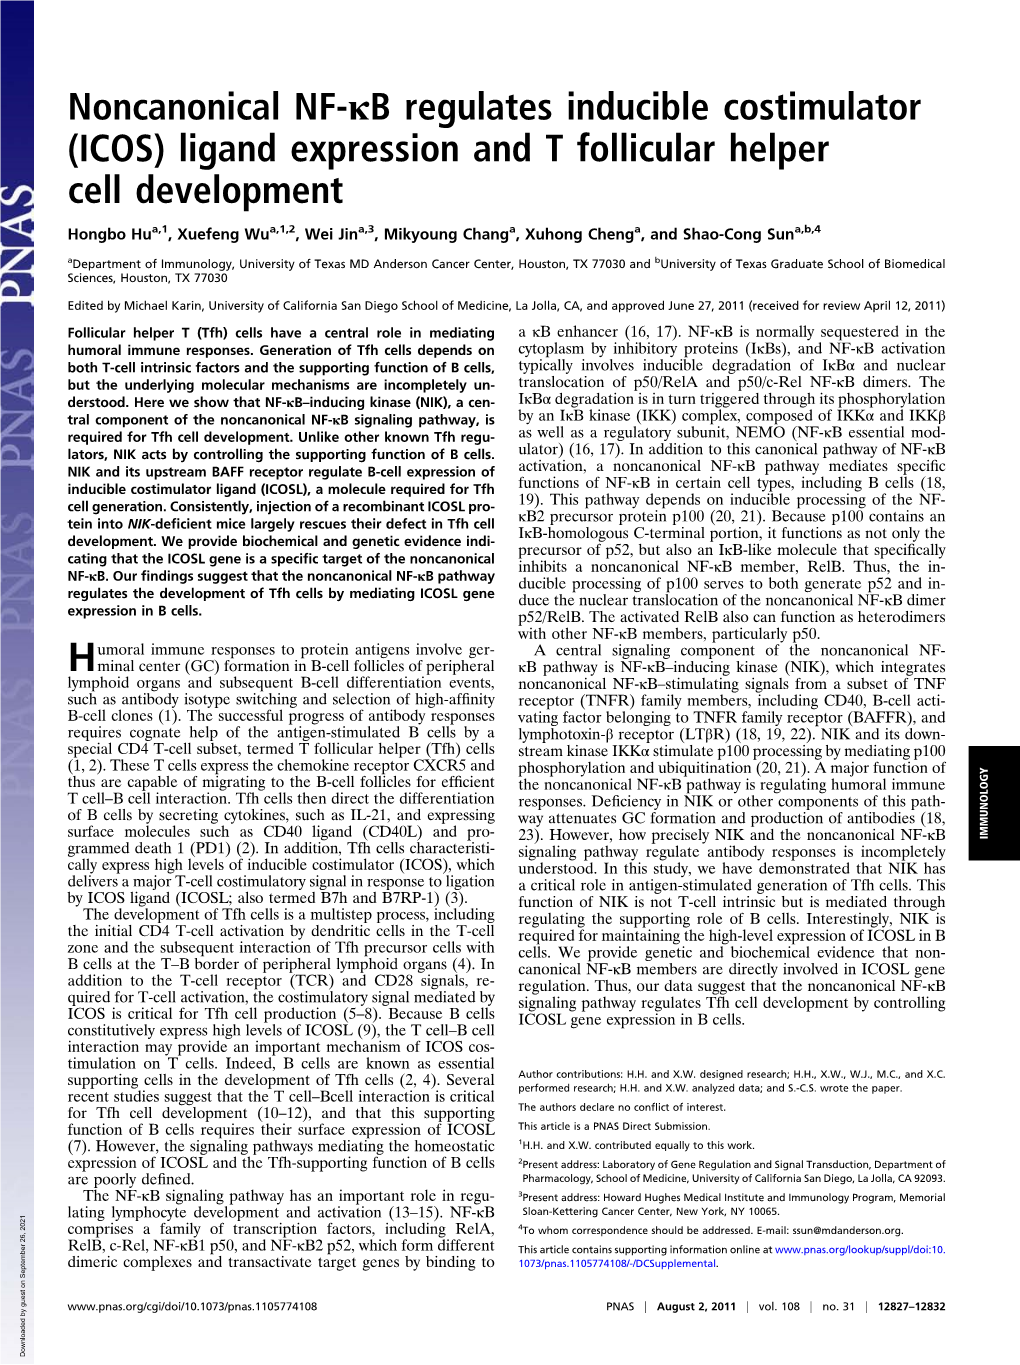 ICOS) Ligand Expression and T Follicular Helper Cell Development